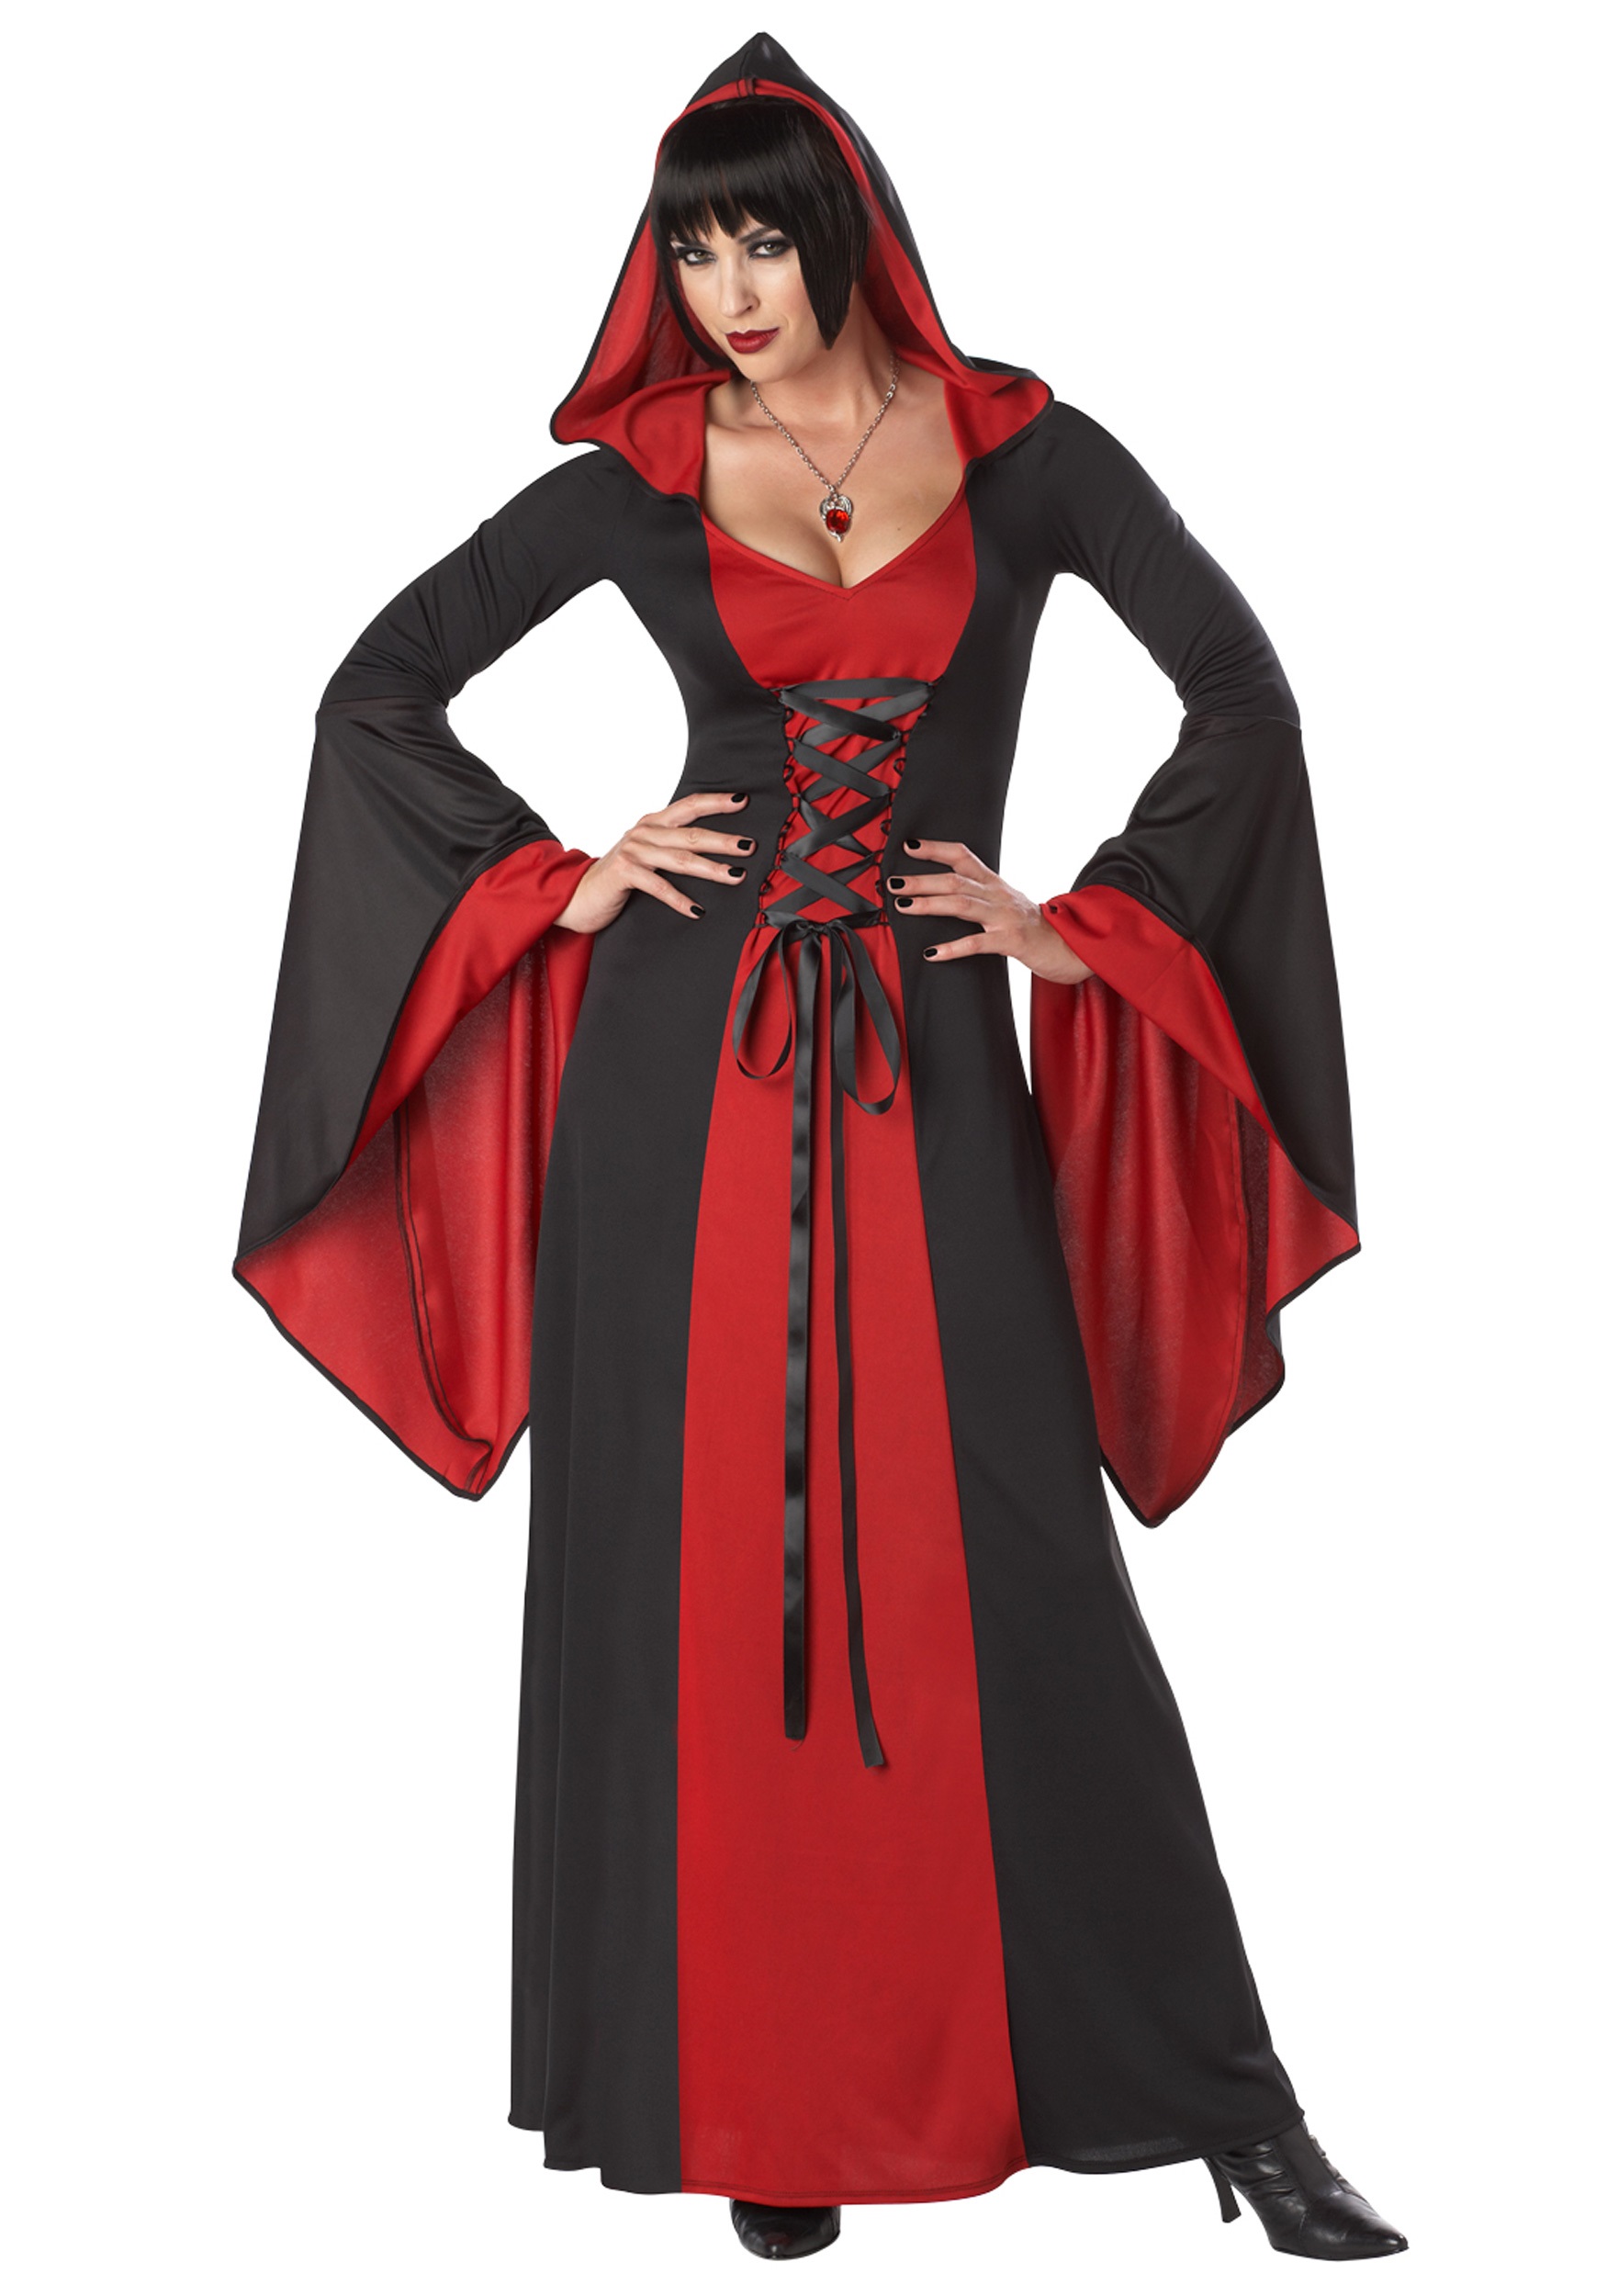 Plus Size Deluxe Hooded Robe Costume Devil Costume For Women Makeup